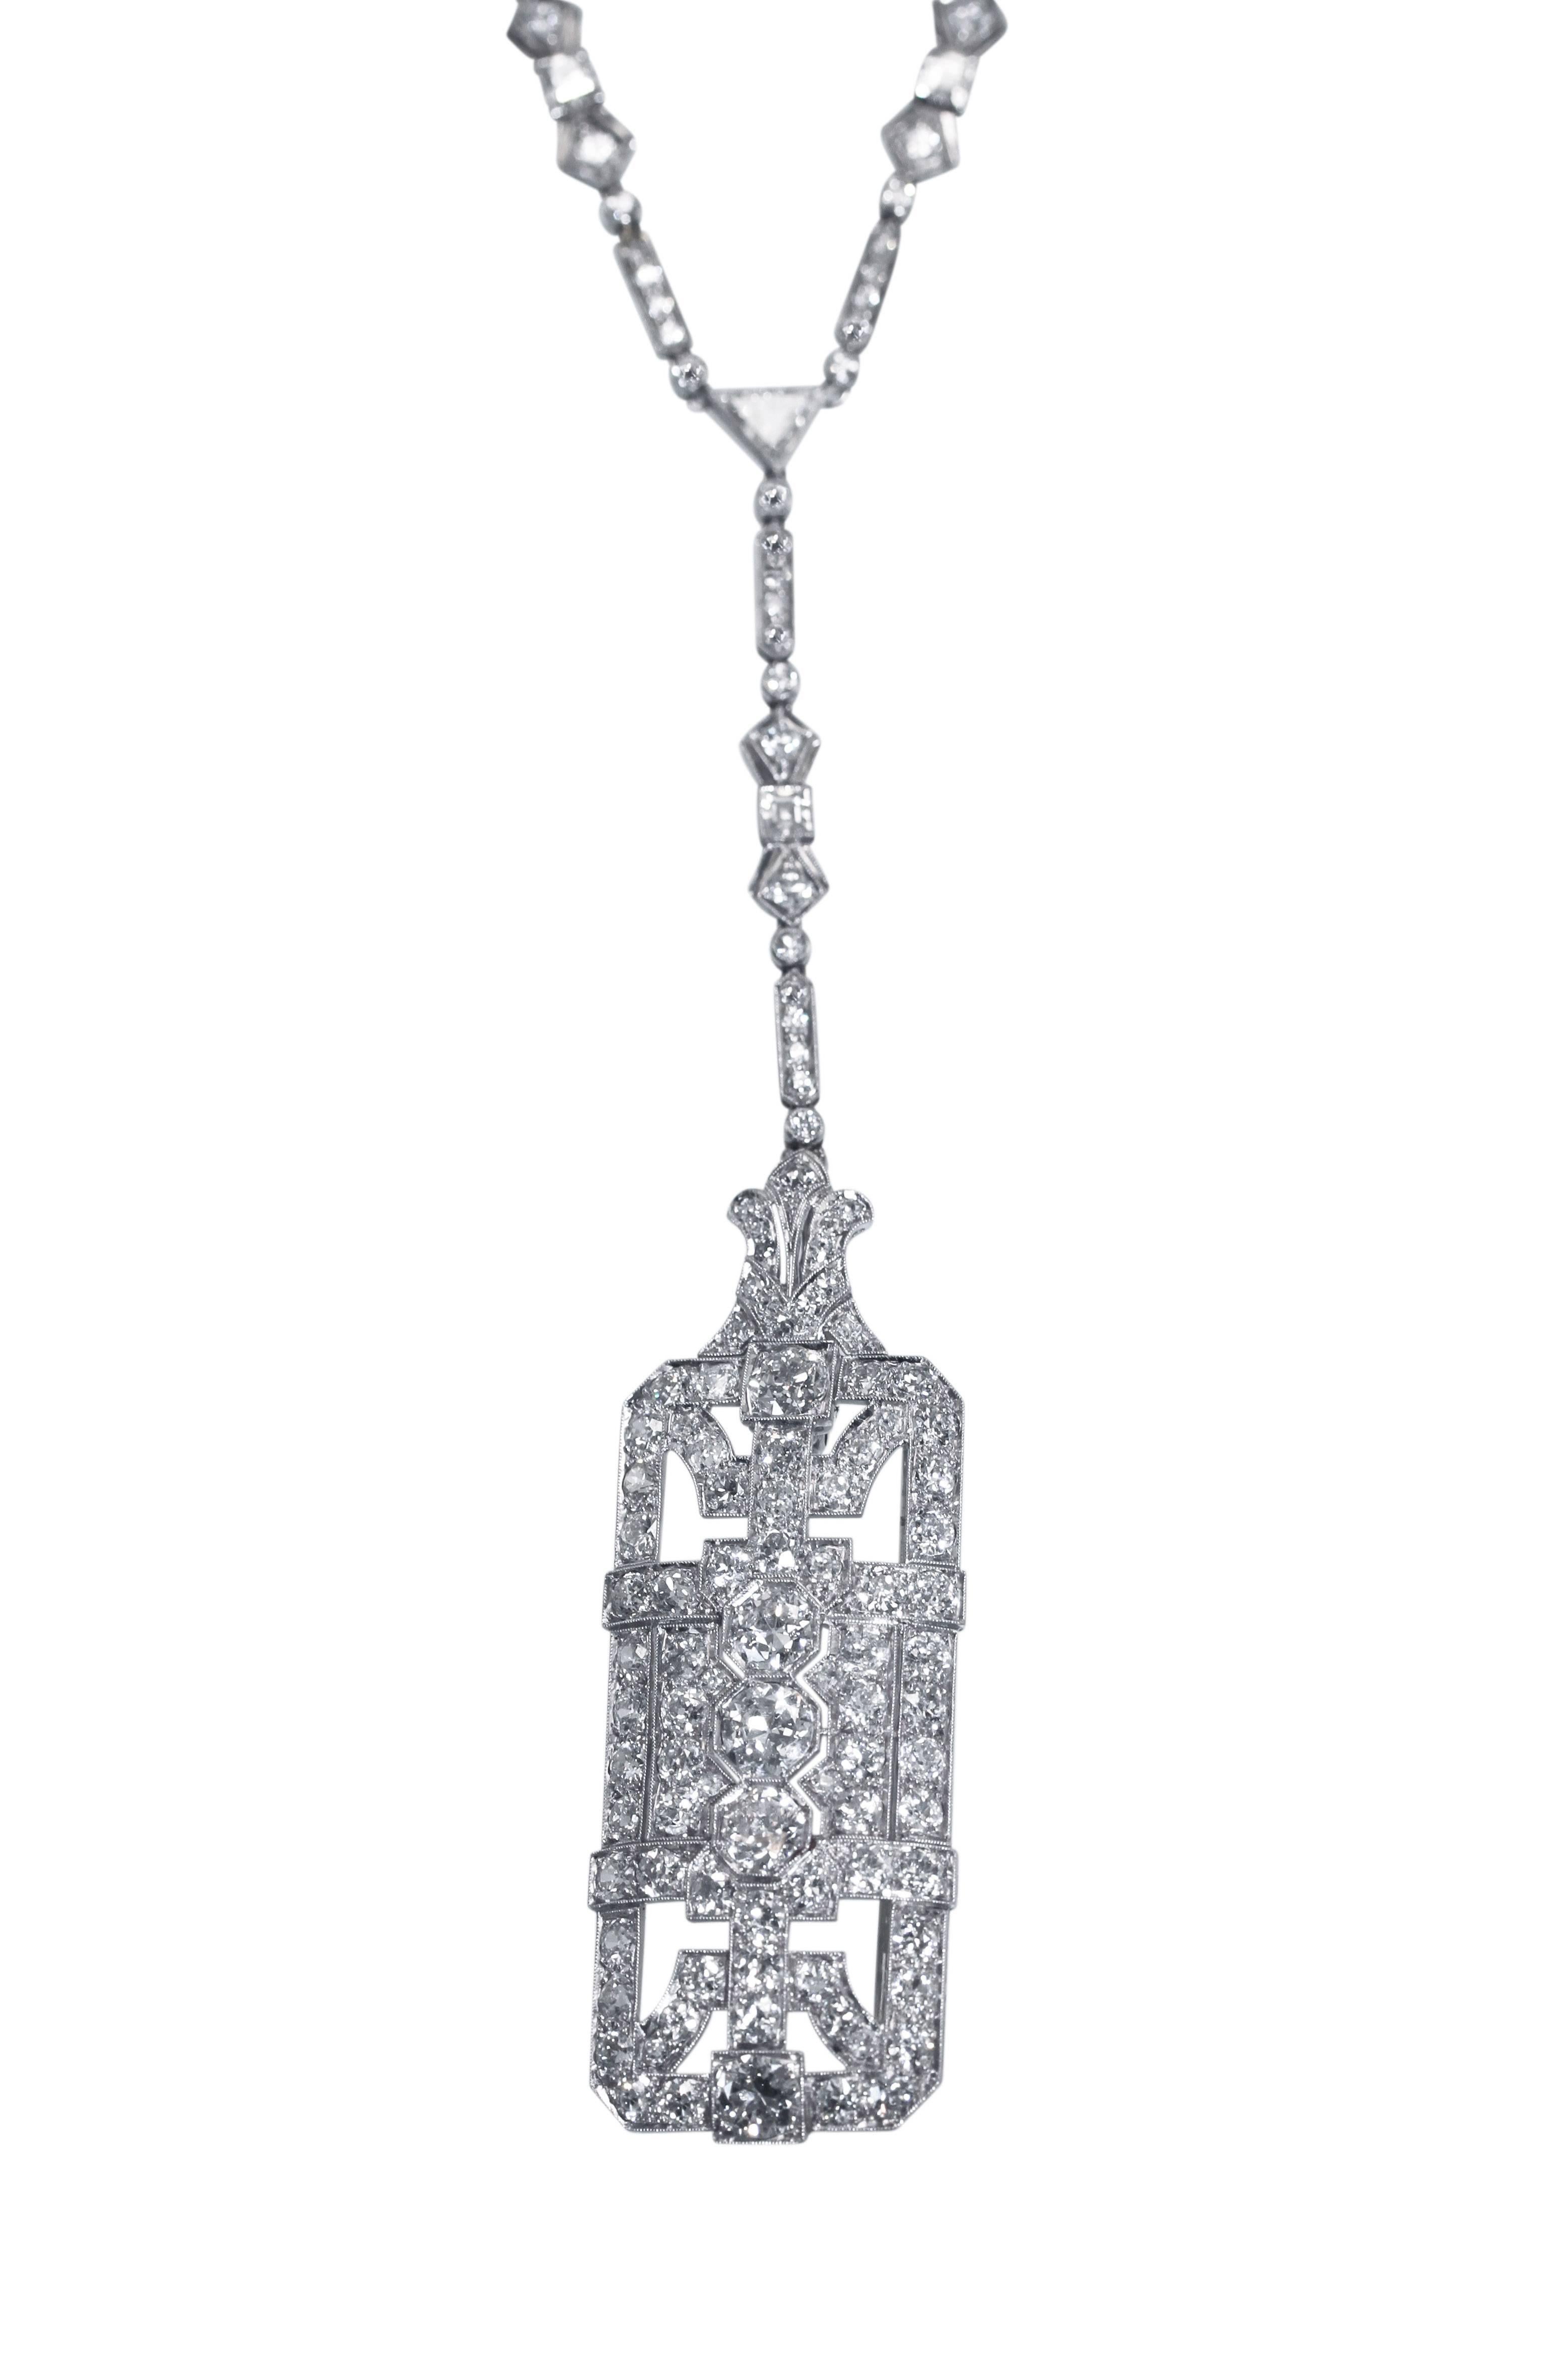 An Art Deco platinum and diamond convertible necklace and brooch/pendant sautoir, circa 1920, designed as a longchain comprised of a series of geometric links suspending a detachable rectangular openwork plaque that converts into a brooch, the chain